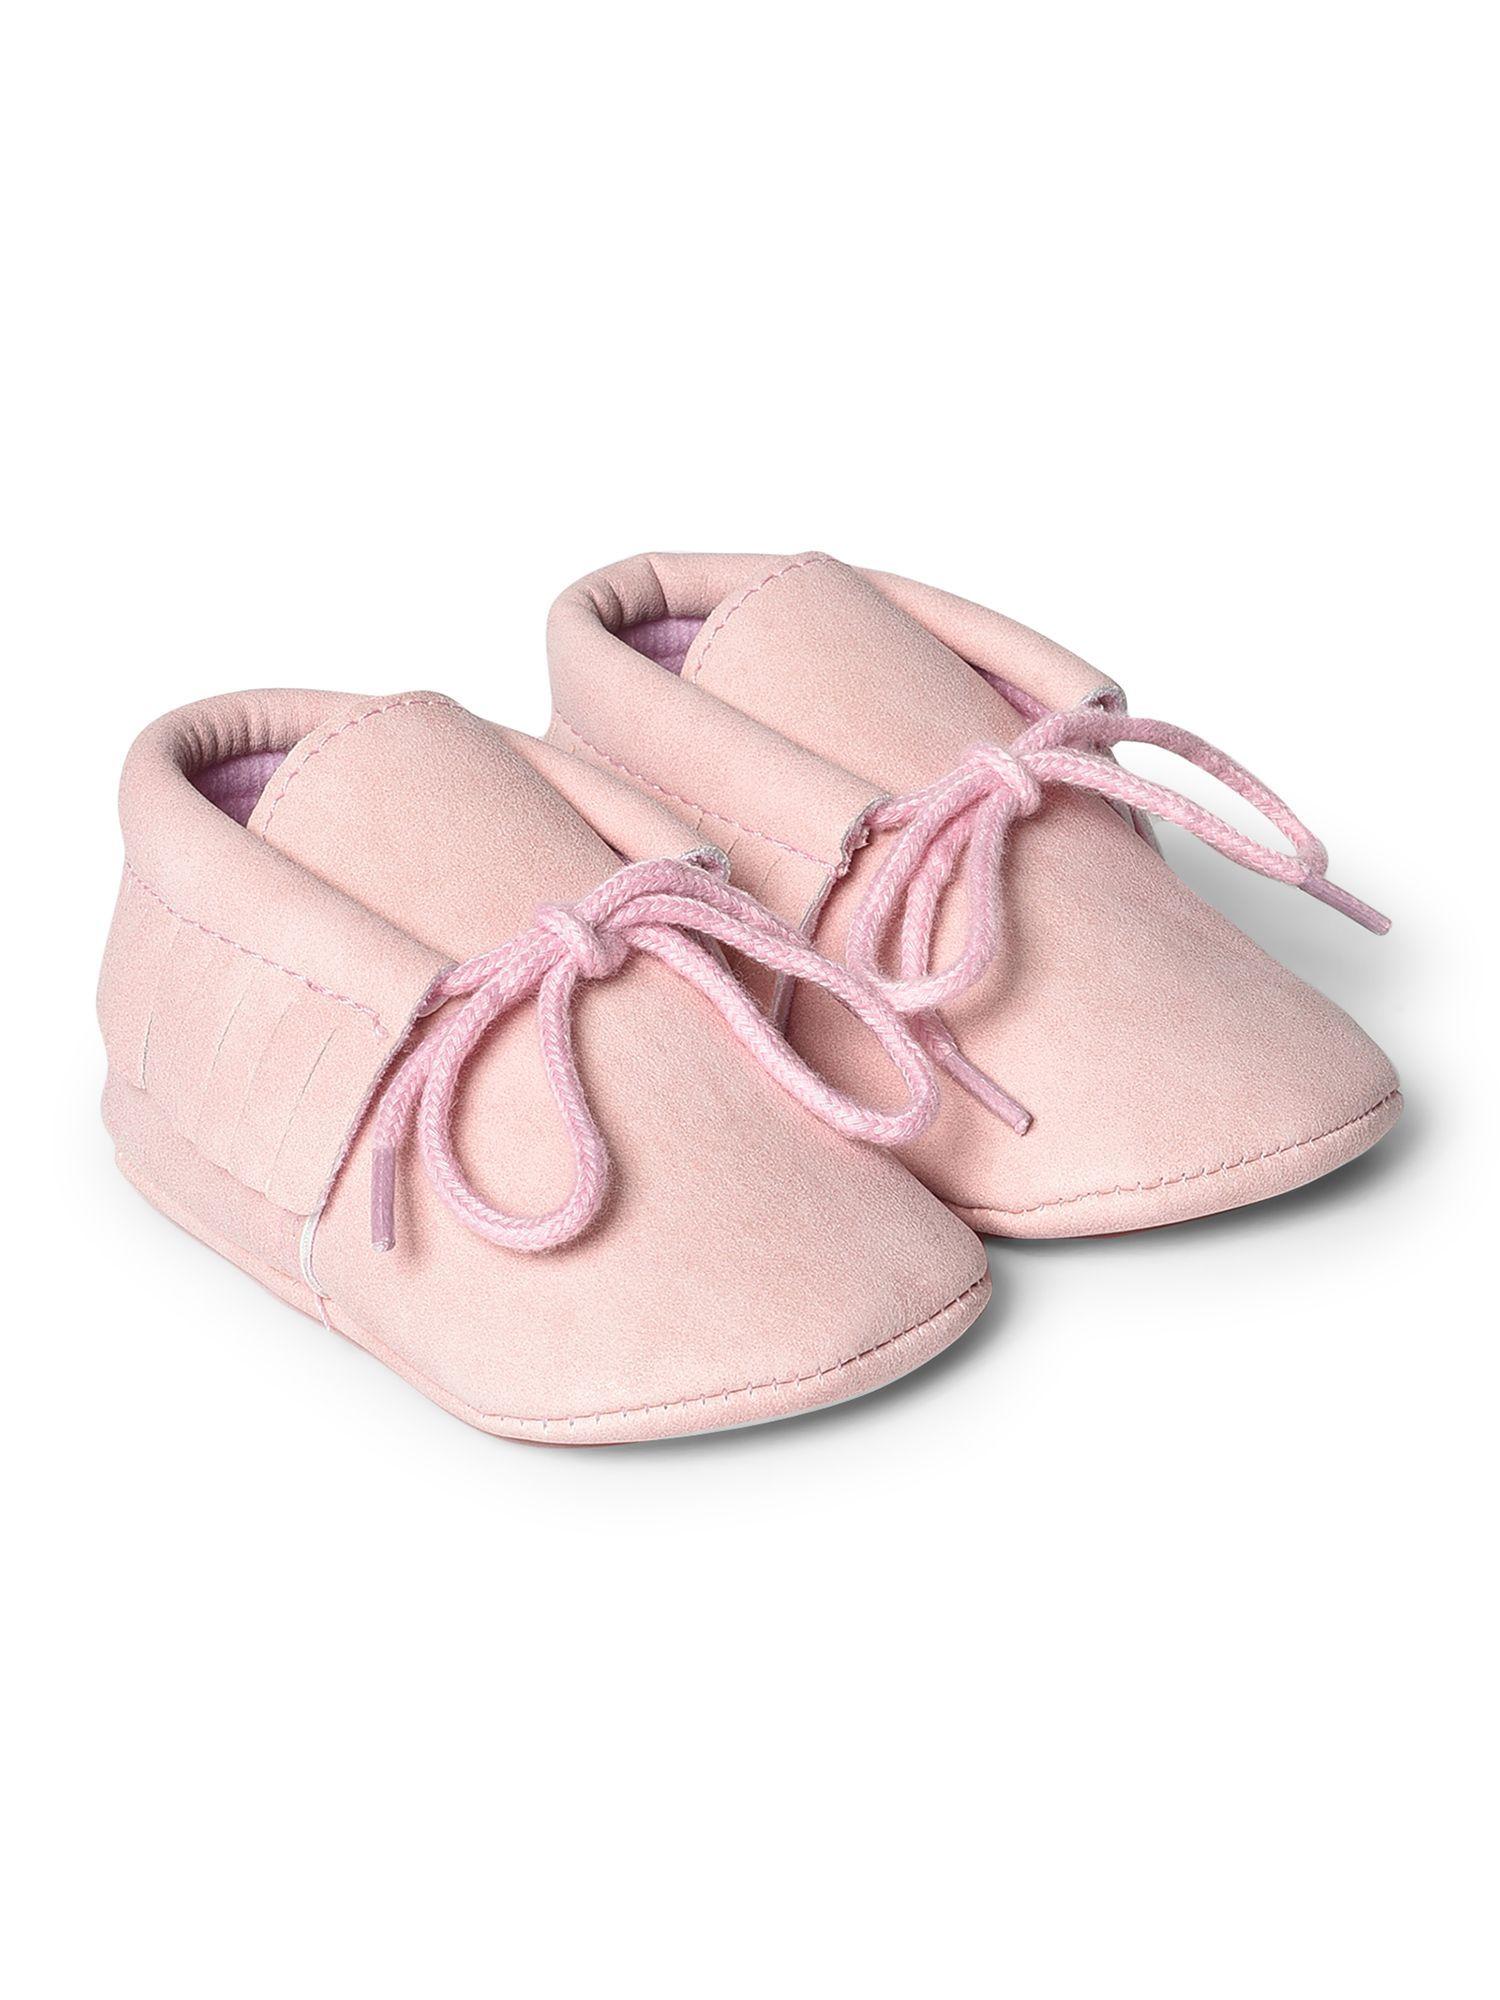 unisex pink solid casual shoes